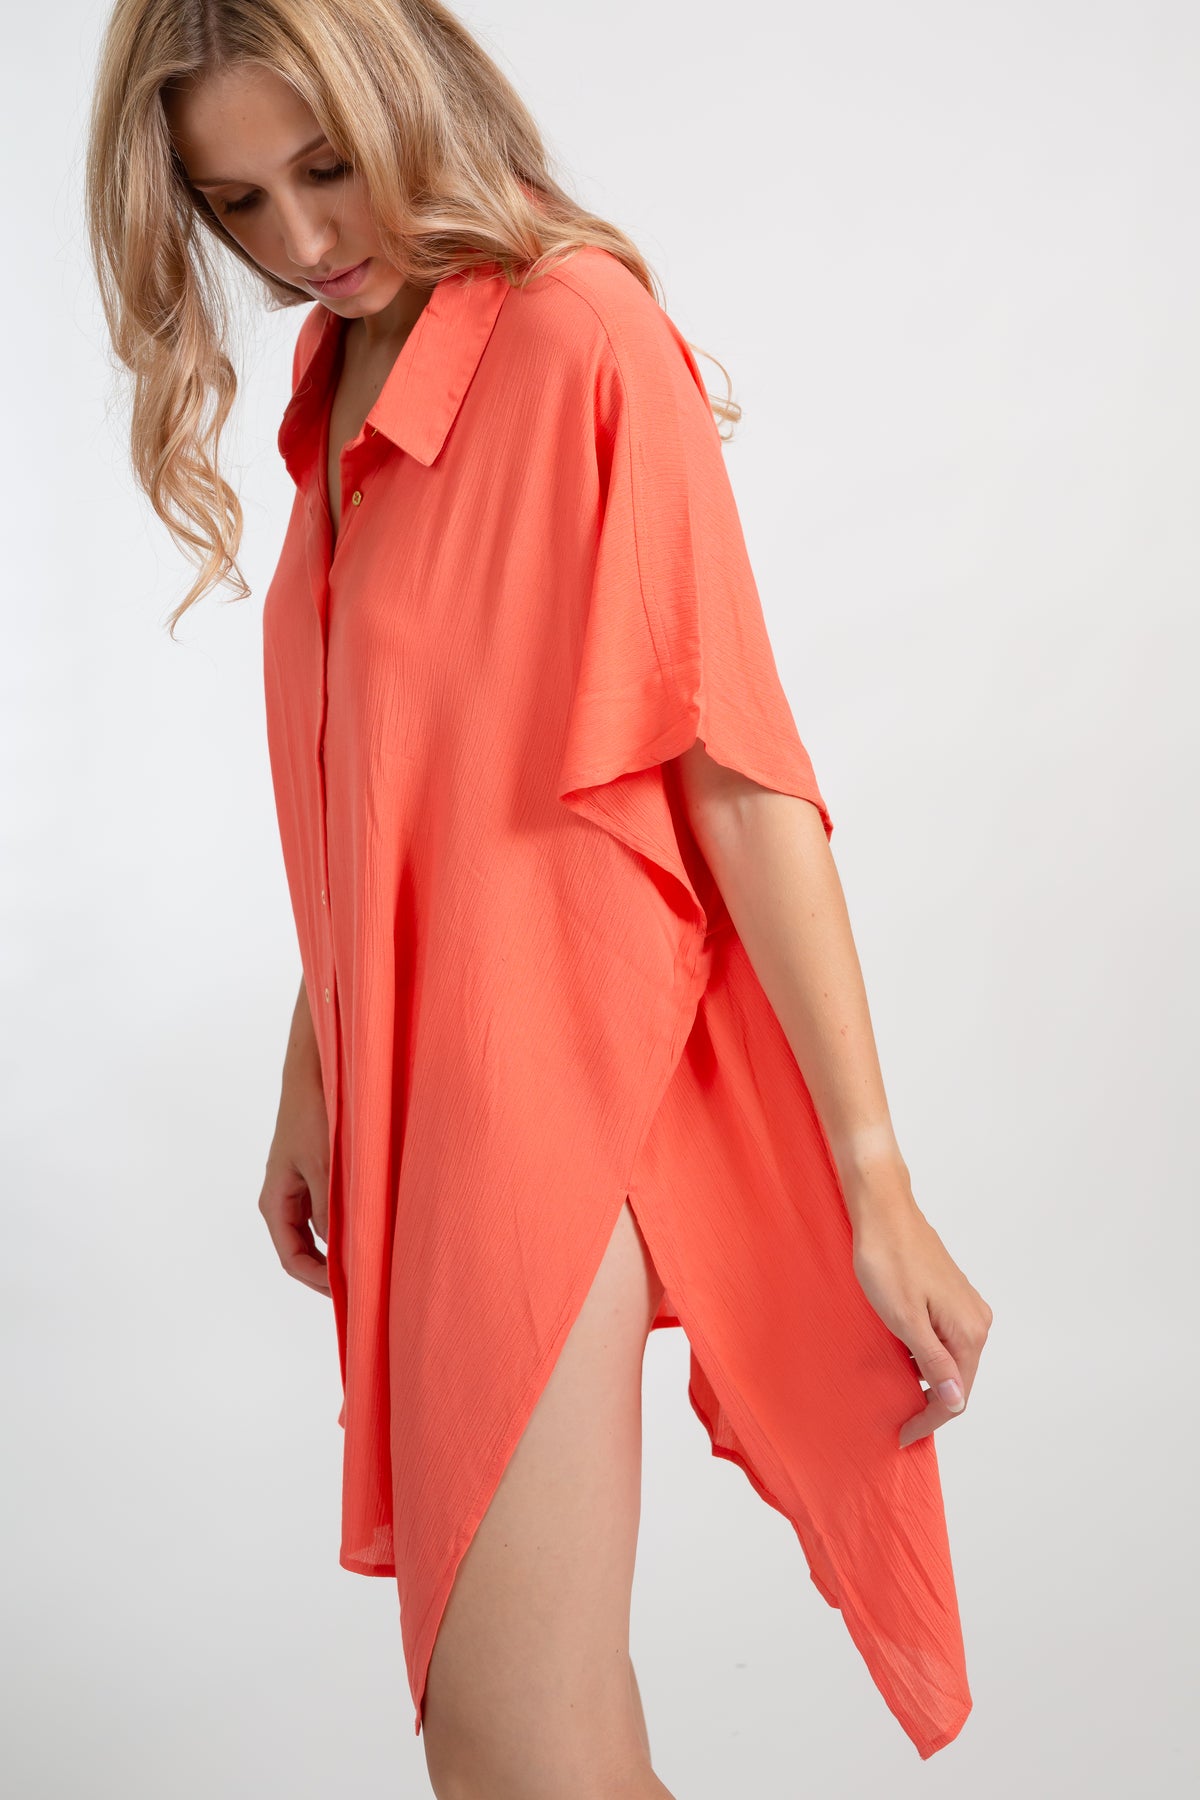 A blonde Caucasian model wearing a orange coral colored in "punch" big shirt bathing suit cover up shirt dress, standing in a studio, on the side pulling on the side of the dress to show the high slit design element. 